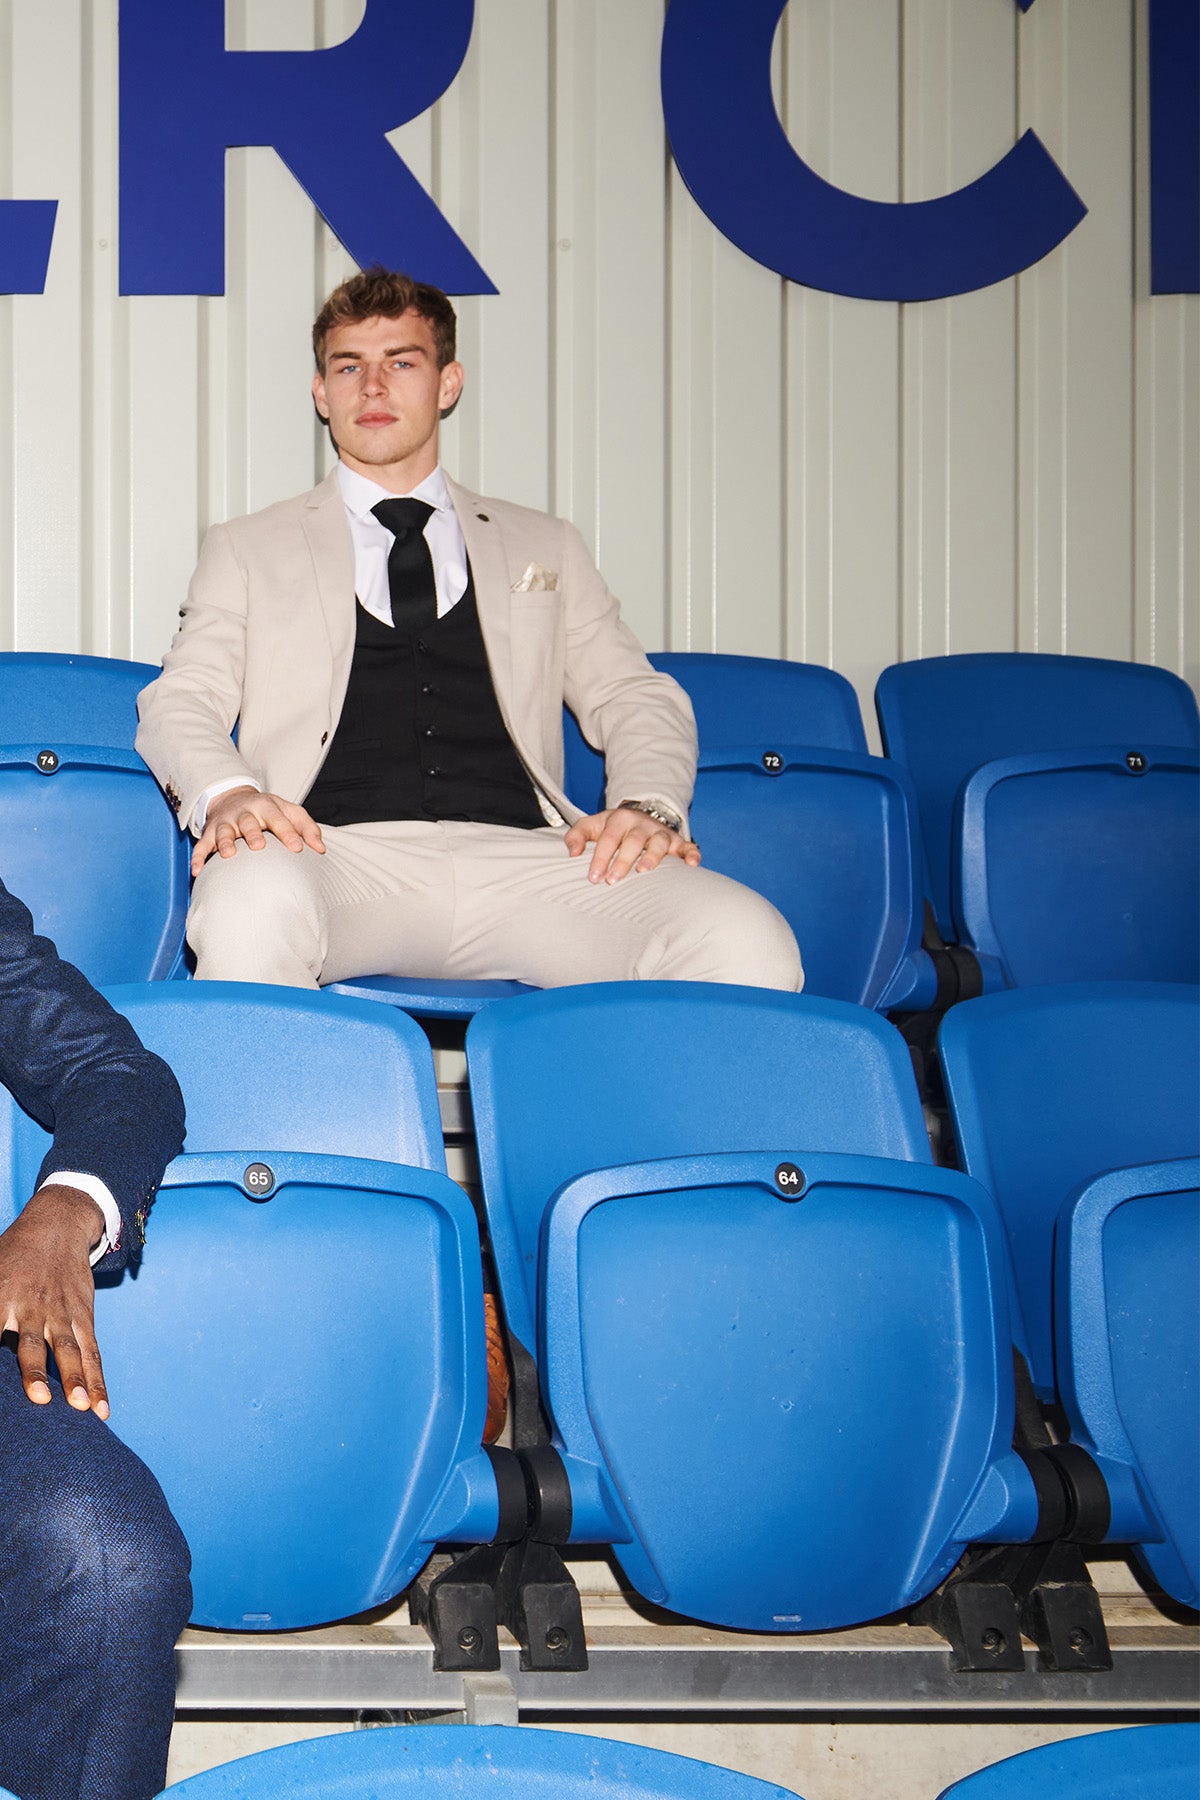 The Leicester City F.C. Collection - HM5 Stone Suit with Kelvin Black Waistcoat As Worn By Mads Hermansen